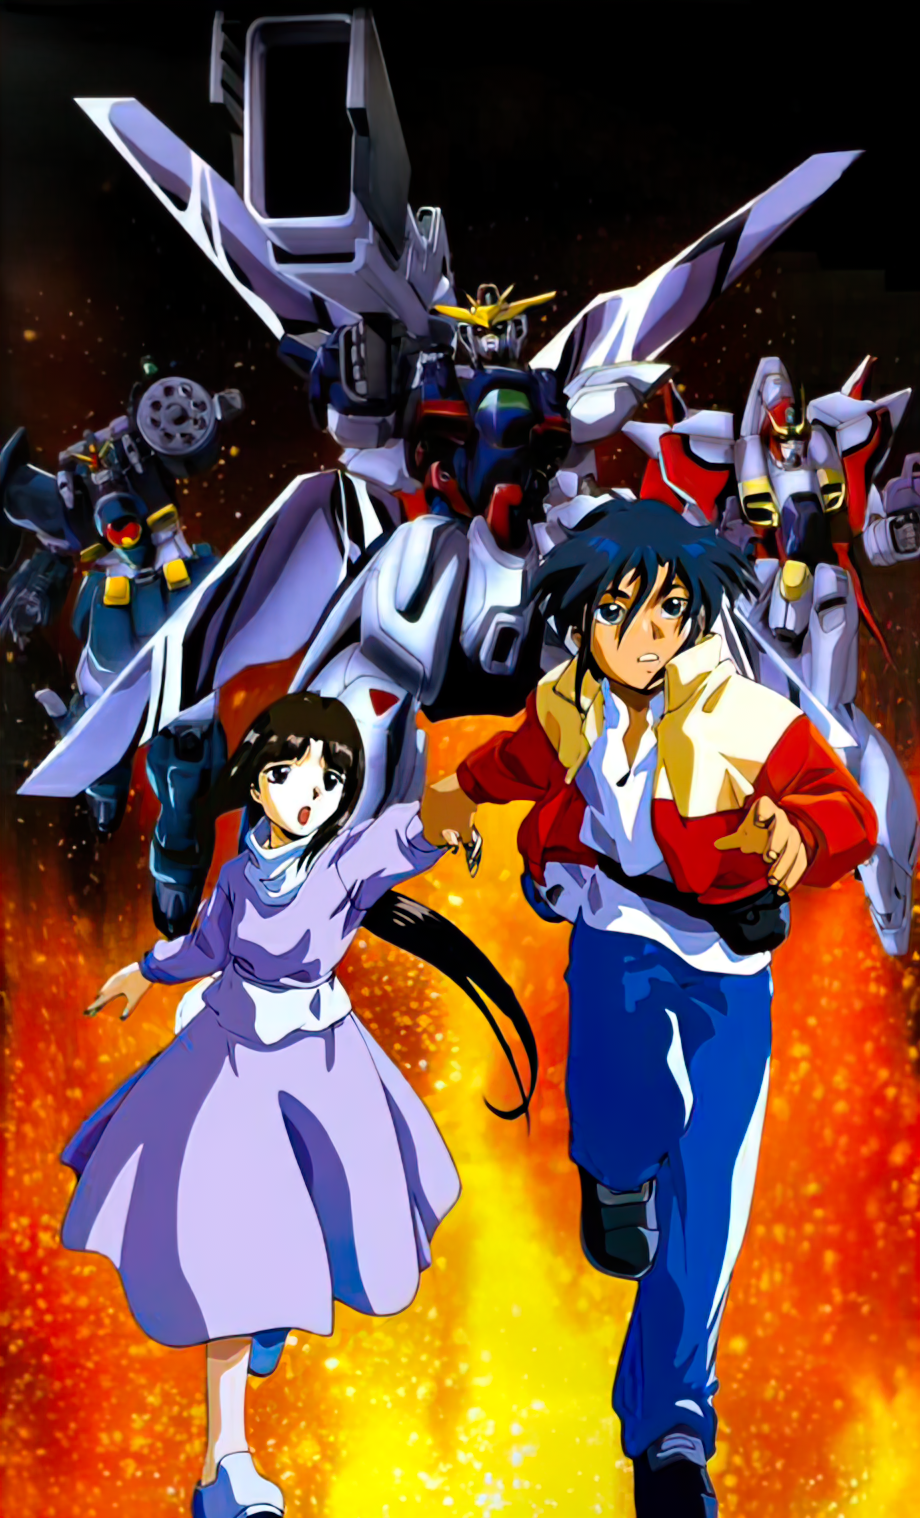 Anime Gundam Picture - Image Abyss